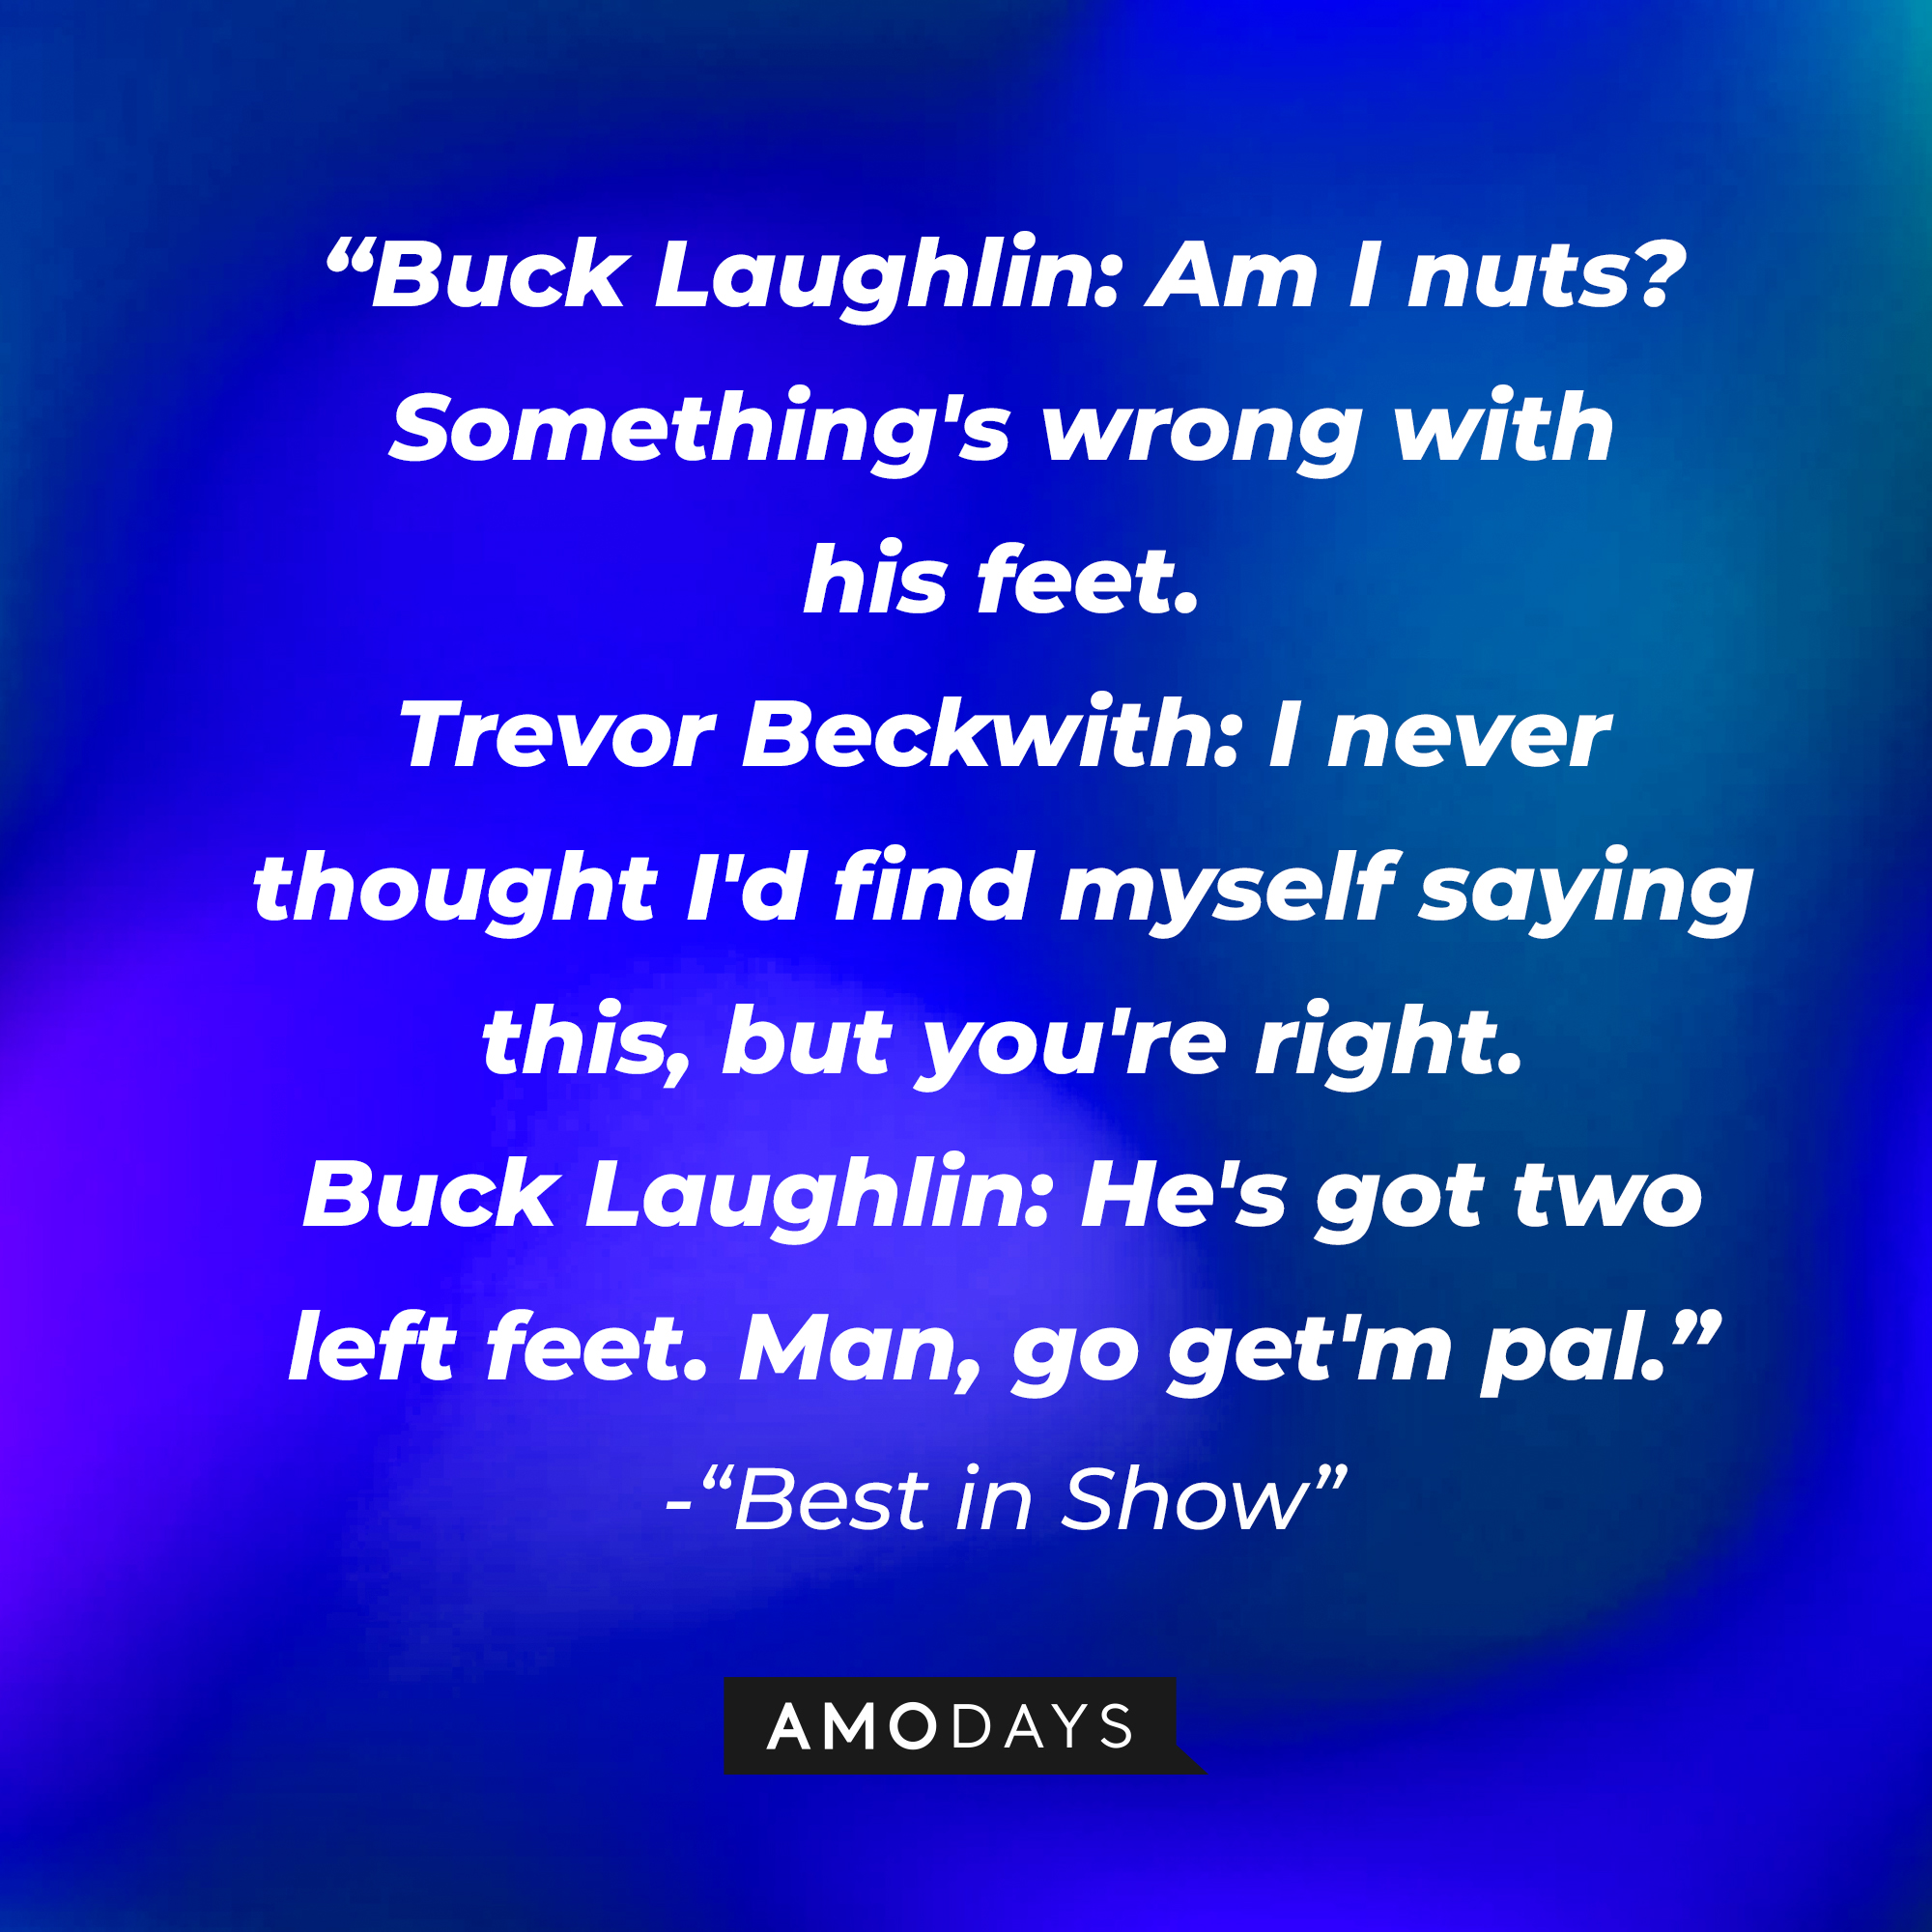 Gerry Fleck's quote in "Best in Show:" "Buck Laughlin: Am I nuts? Something's wrong with his feet. ; Trevor Beckwith: I never thought I'd find myself saying this, but you're right. ; Buck Laughlin: He's got two left feet. Man, go get'm pal." | Source: AmoDays